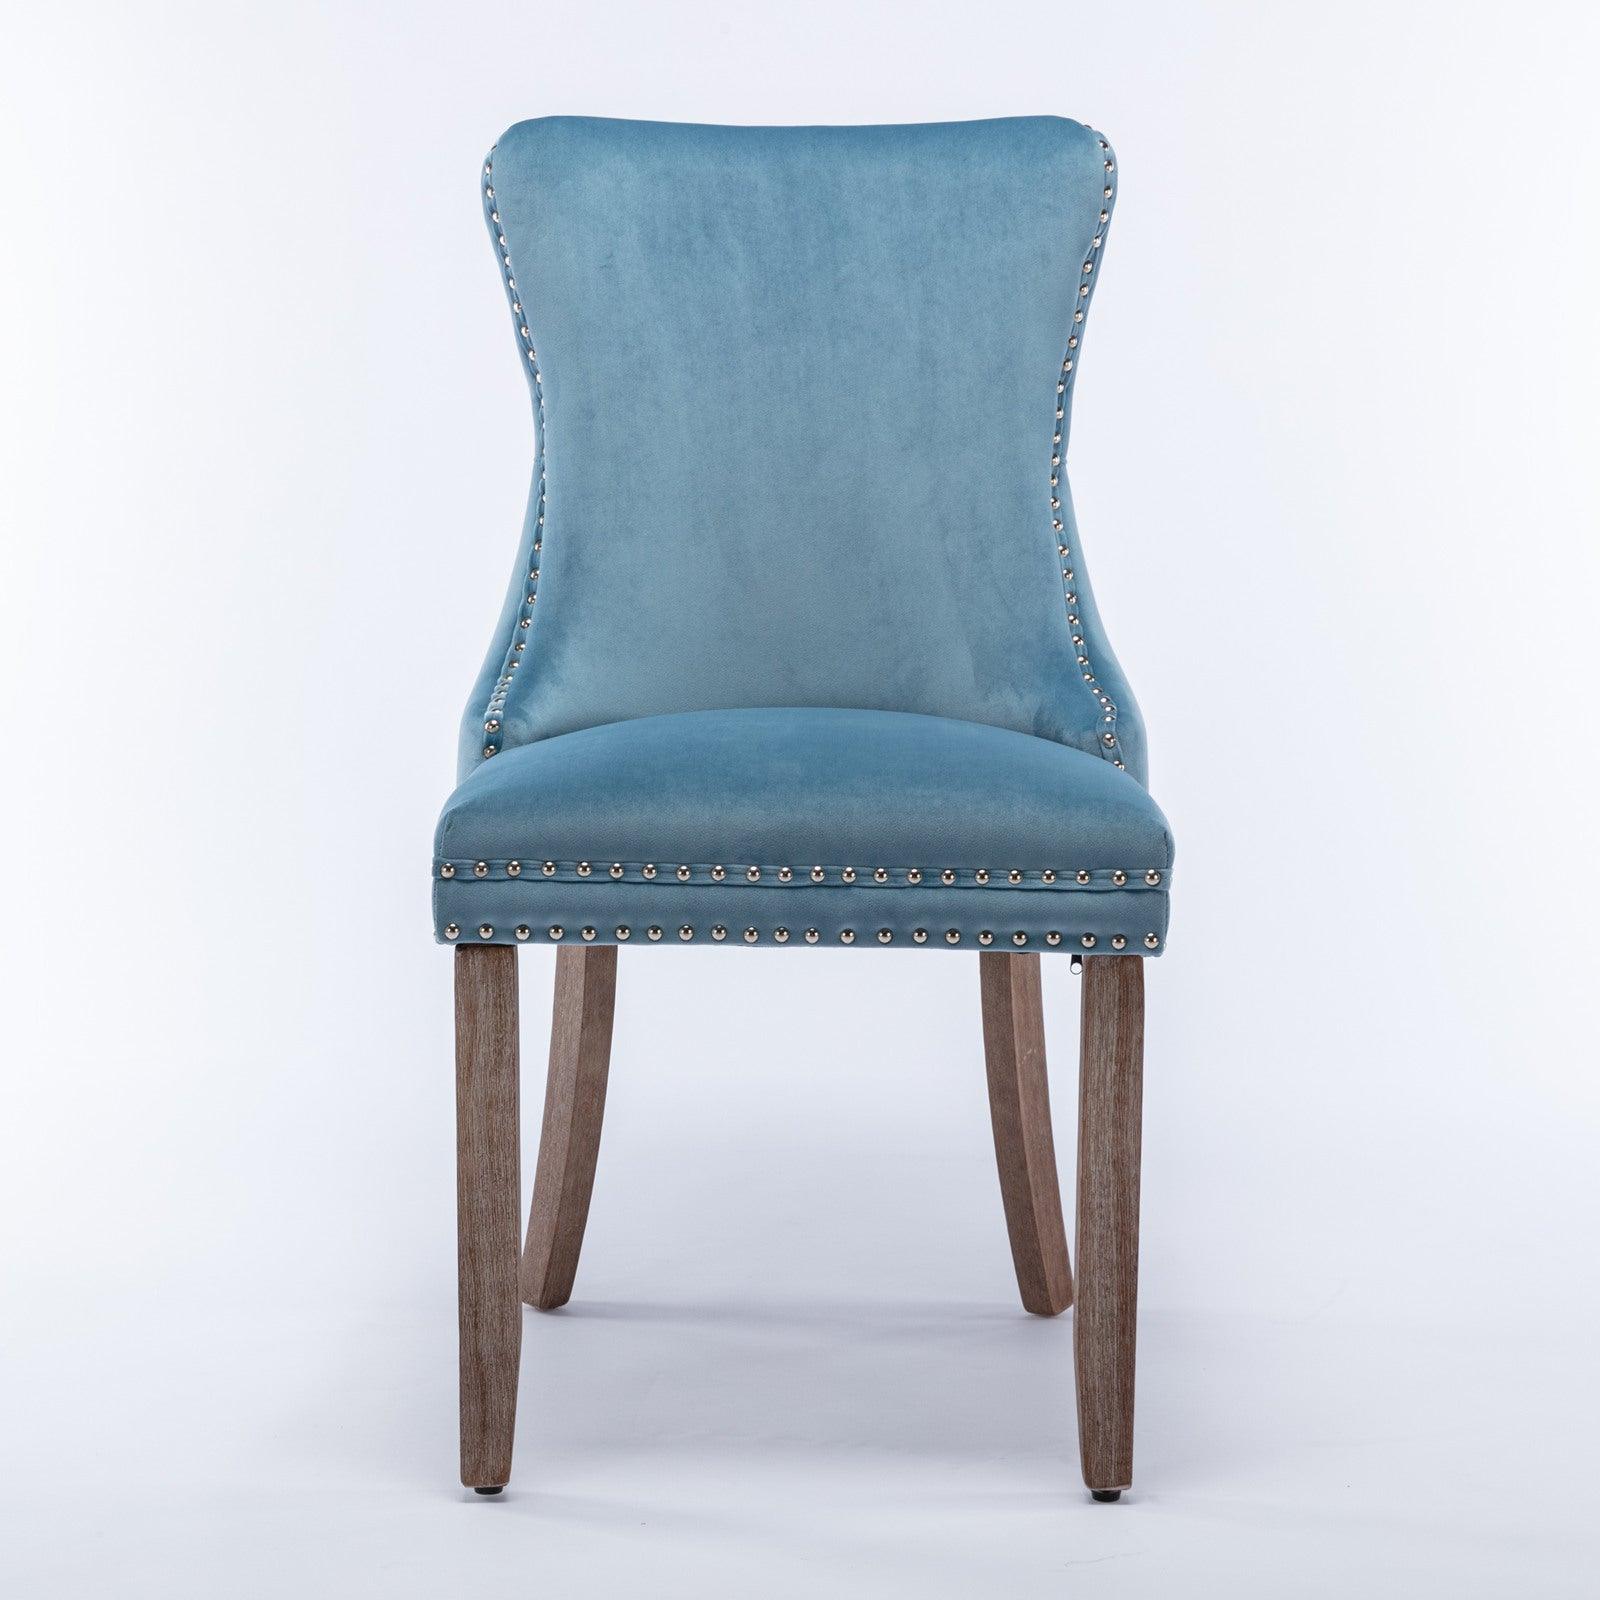 🆓🚛 Upholstered Wing-Back Dining Chair With Backstitching Nailhead Trim & Solid Wood Legs, Set Of 2, Light Blue